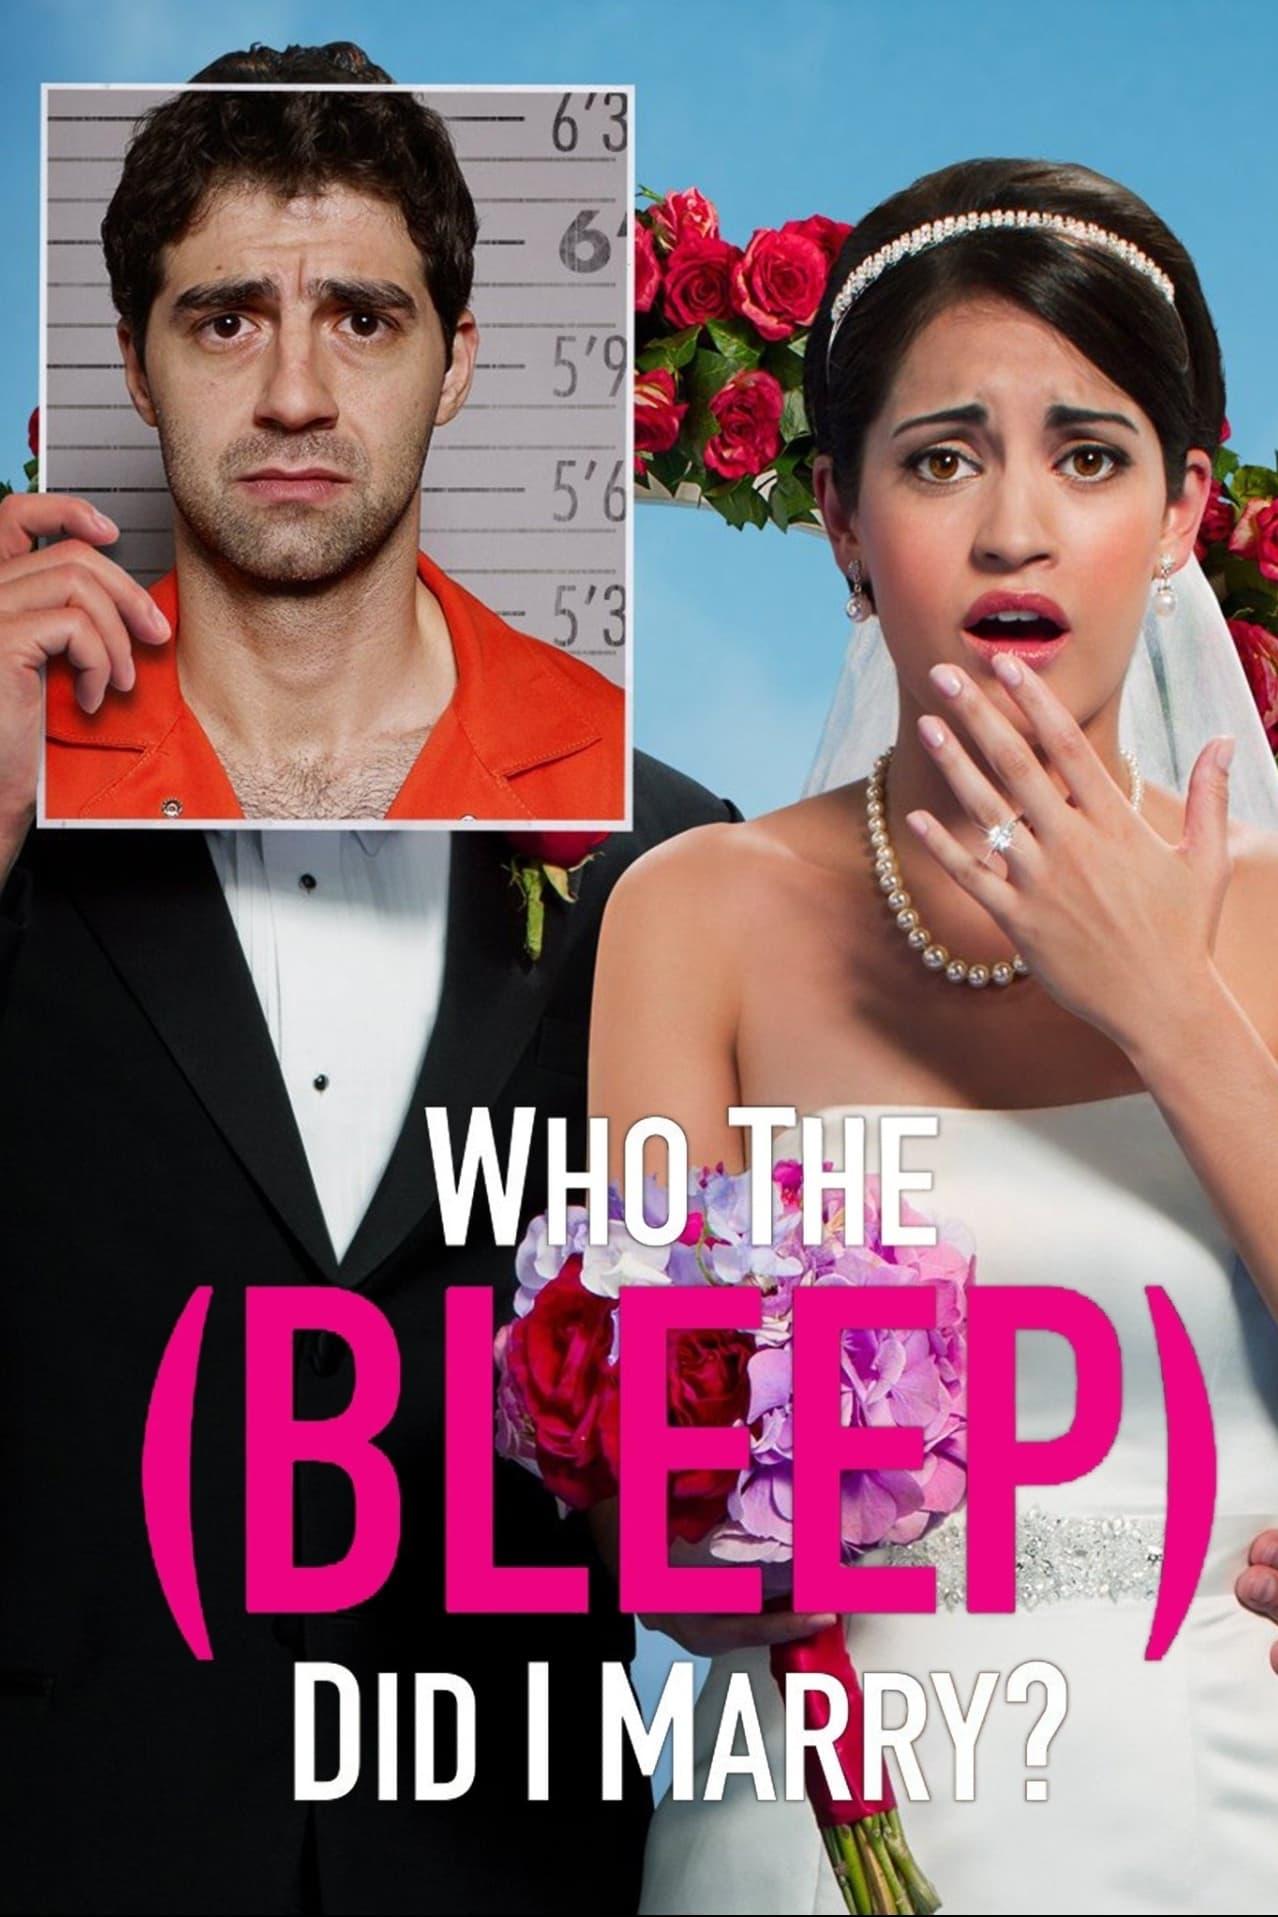 Who The (Bleep) Did I Marry? poster